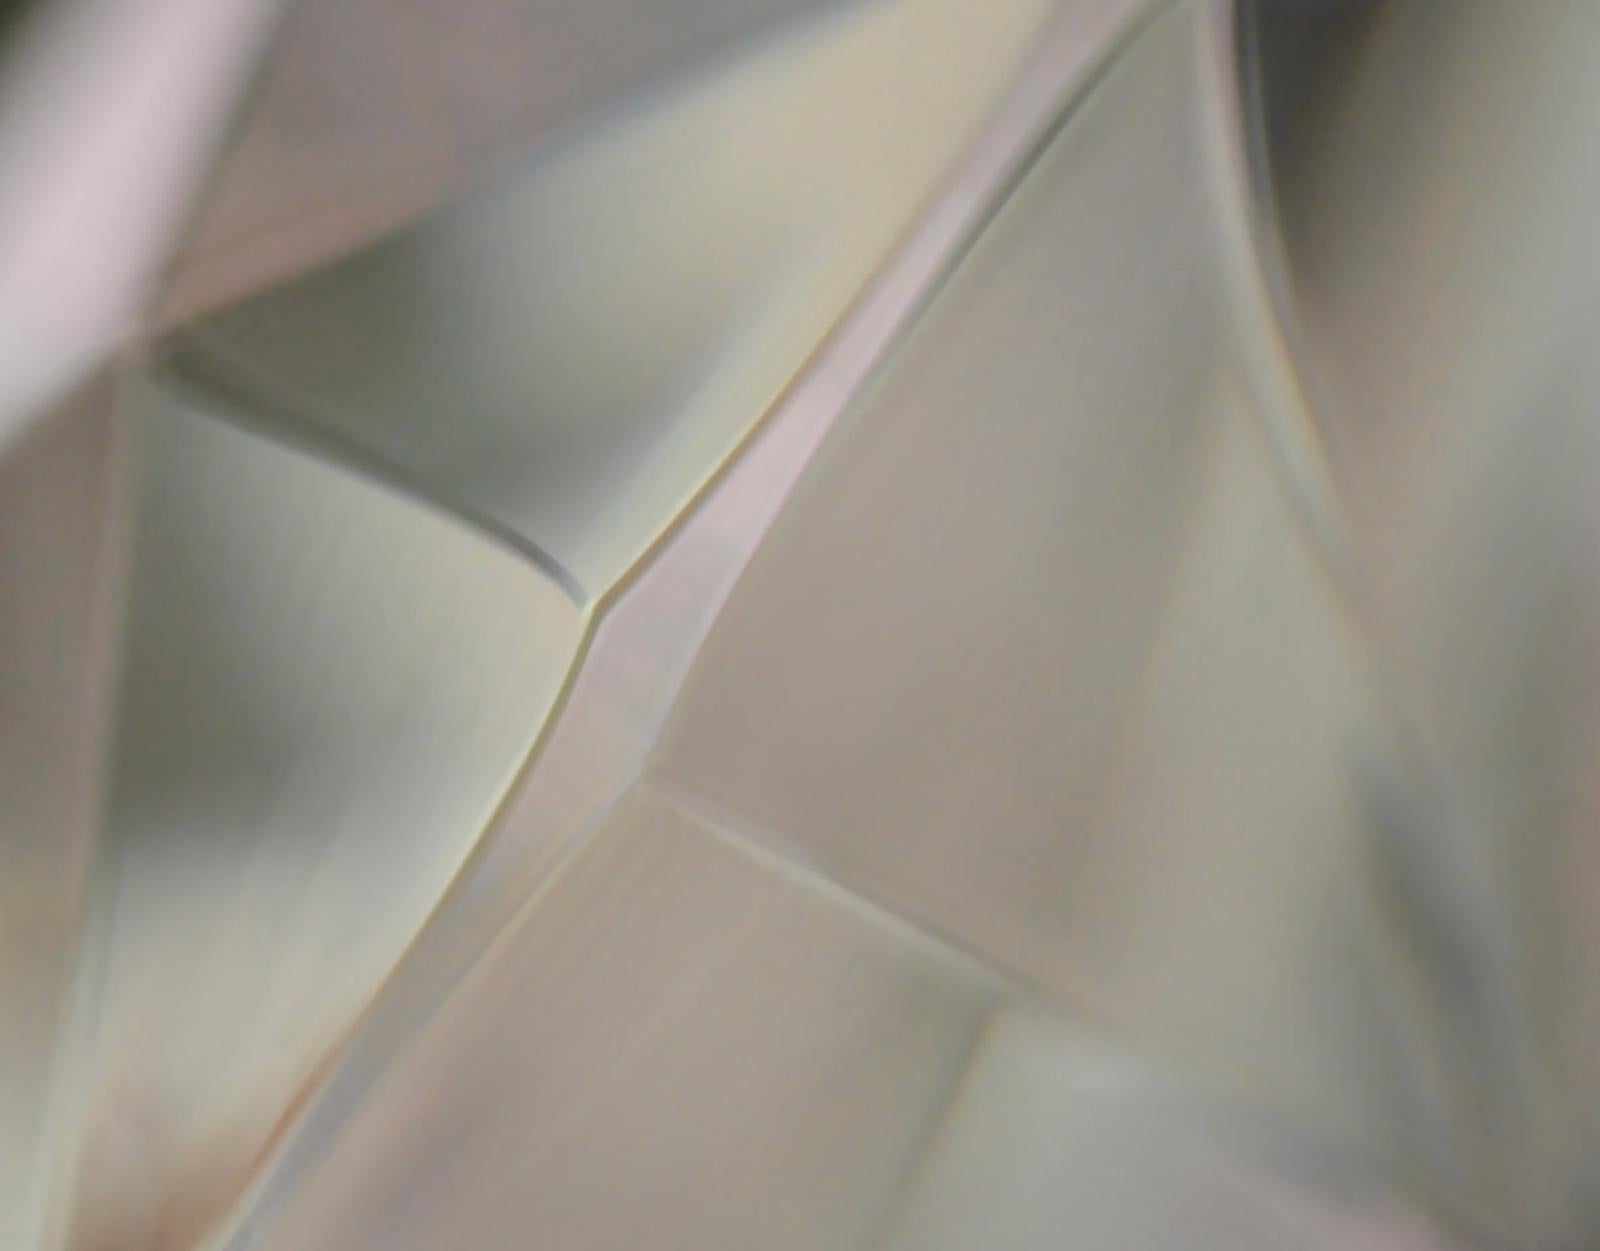 Gem facet 3 - Signed limited edition abstract print, Contemporary Large format - Photograph by Michael Banks